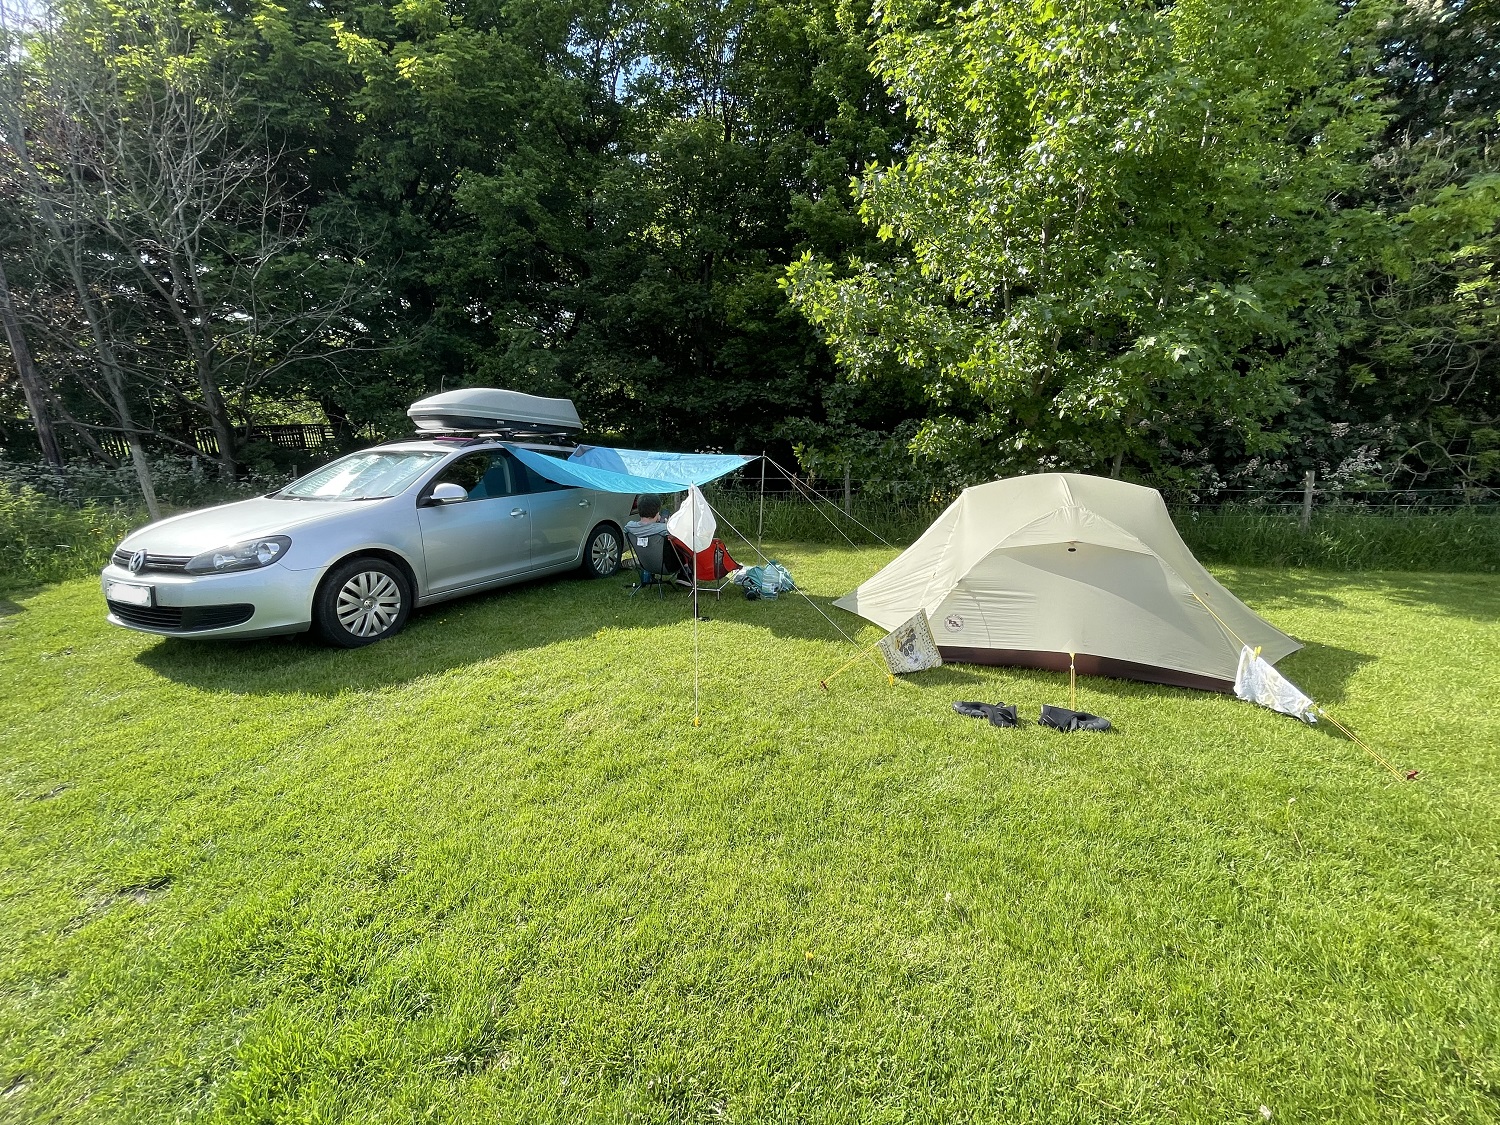 Best car awnings: tents that attach to cars – UK Edition